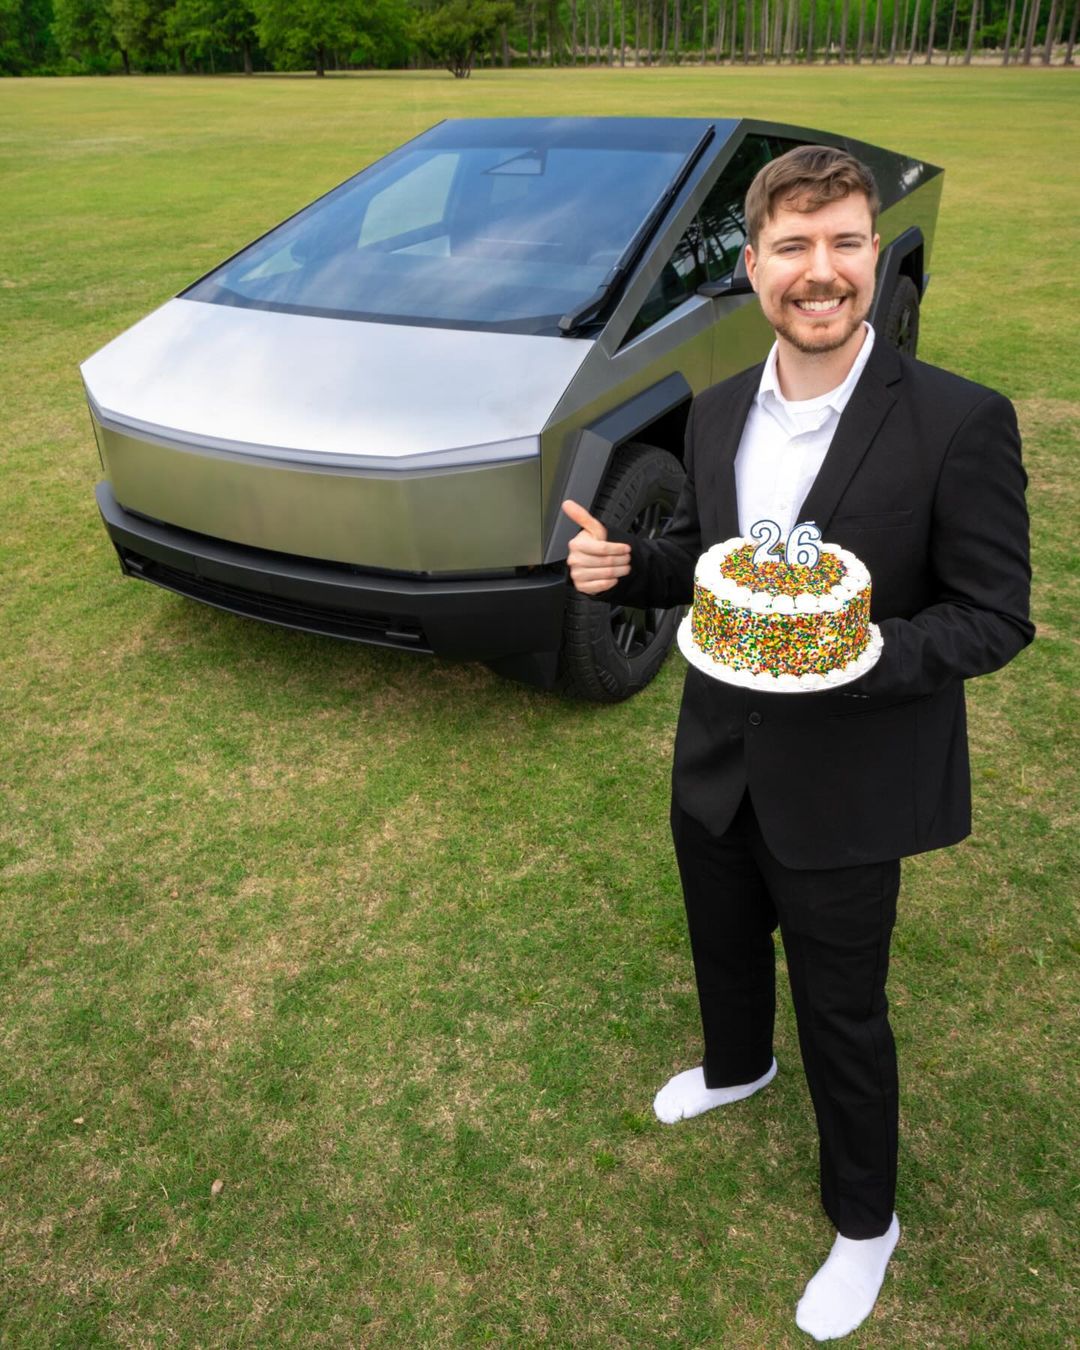 To celebrate, MrBeast is giving away 26 Teslas to his followers